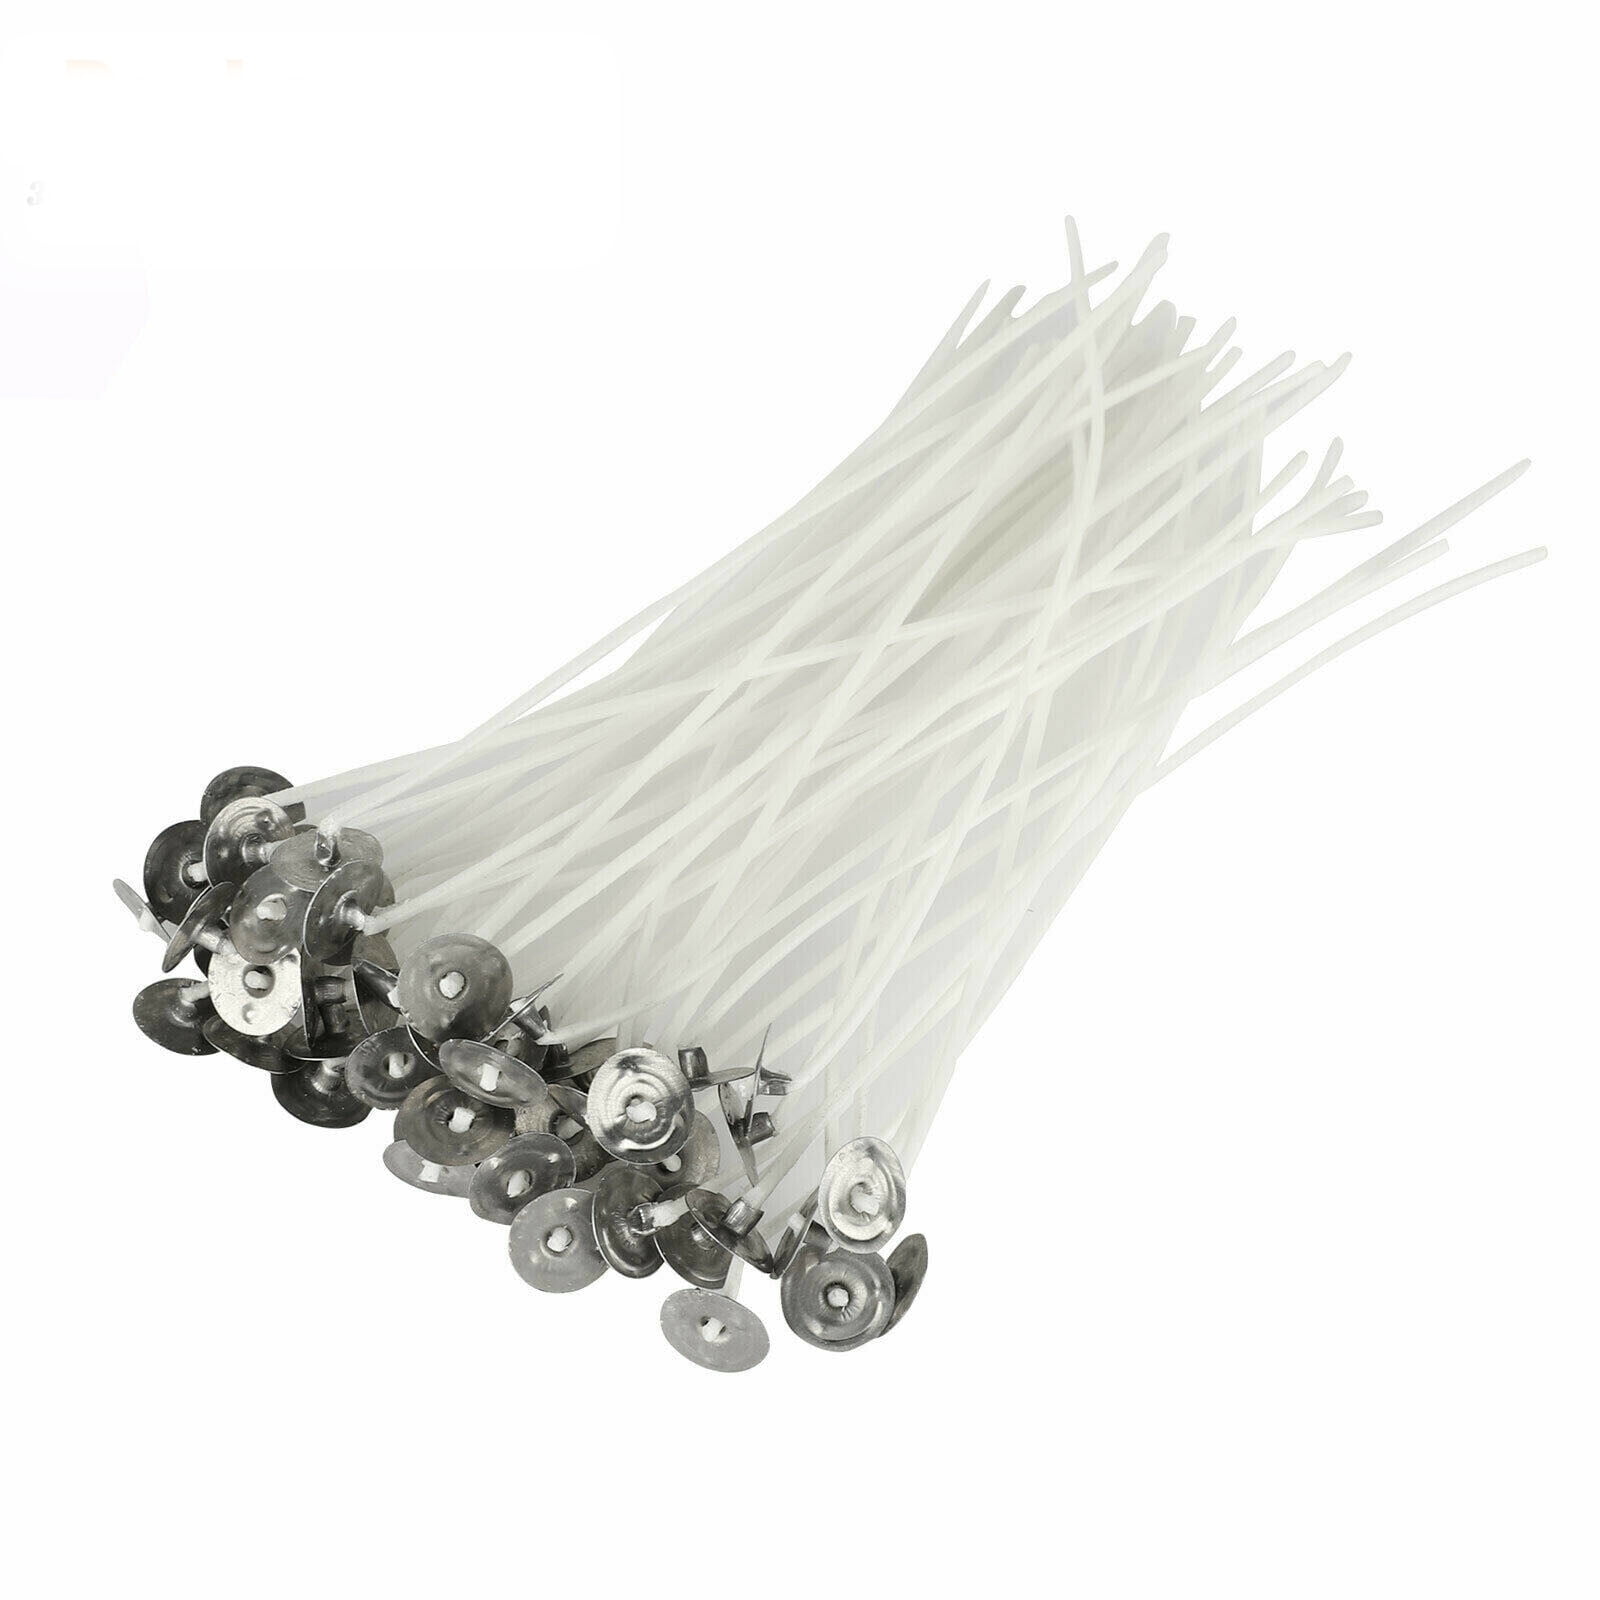 Aroma-Lite 180 Pre-tabbed Wicks 6 inch - 10 Pack - FREE Shipping -  Northstar3c Candle Supplies